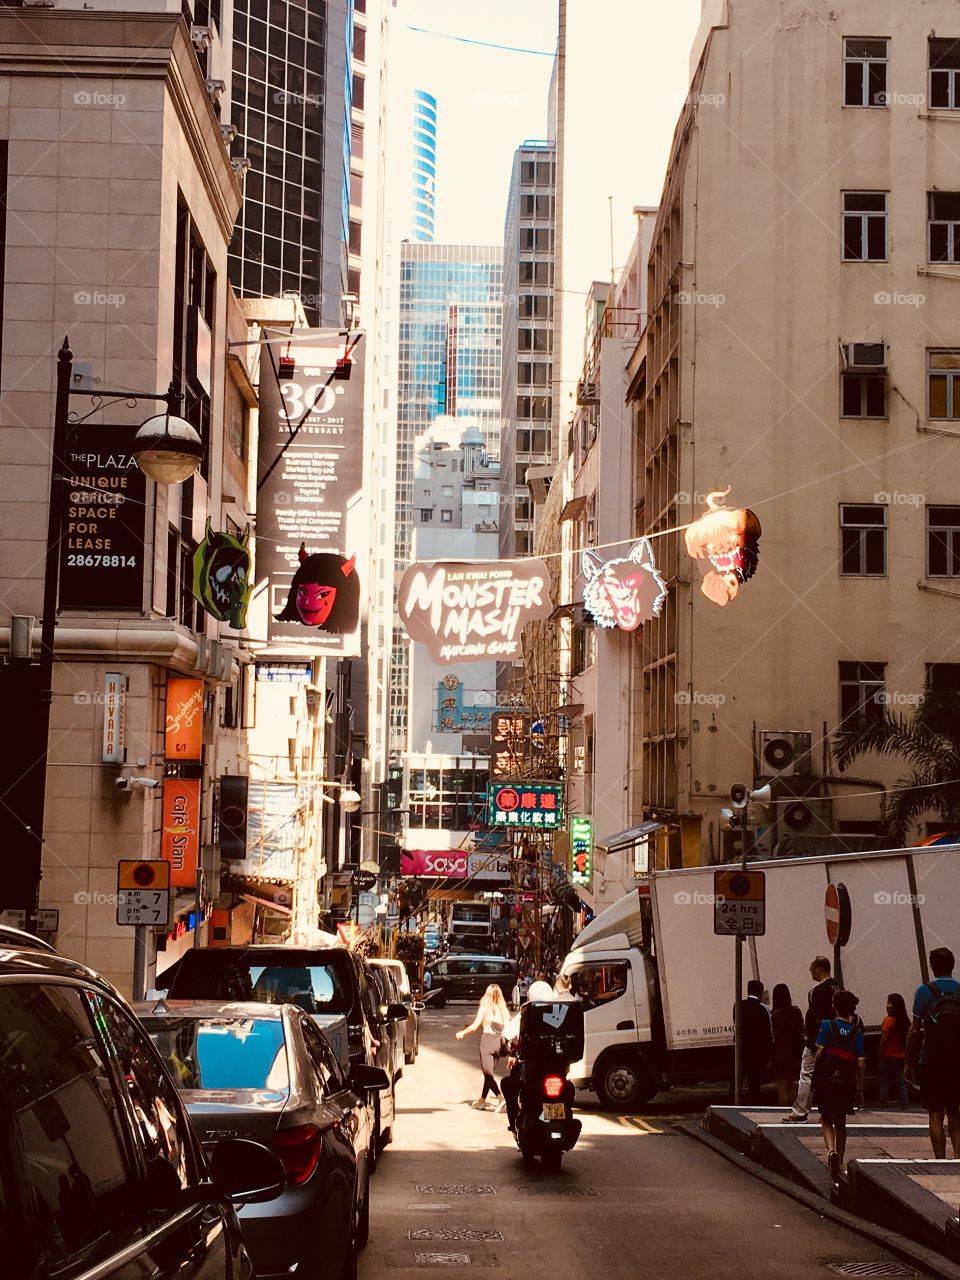 Hong Kong. A City bustling with the newness, business, and money, as well as old, traditional, struggling areas that represent days of old. Loved this eclectic street 